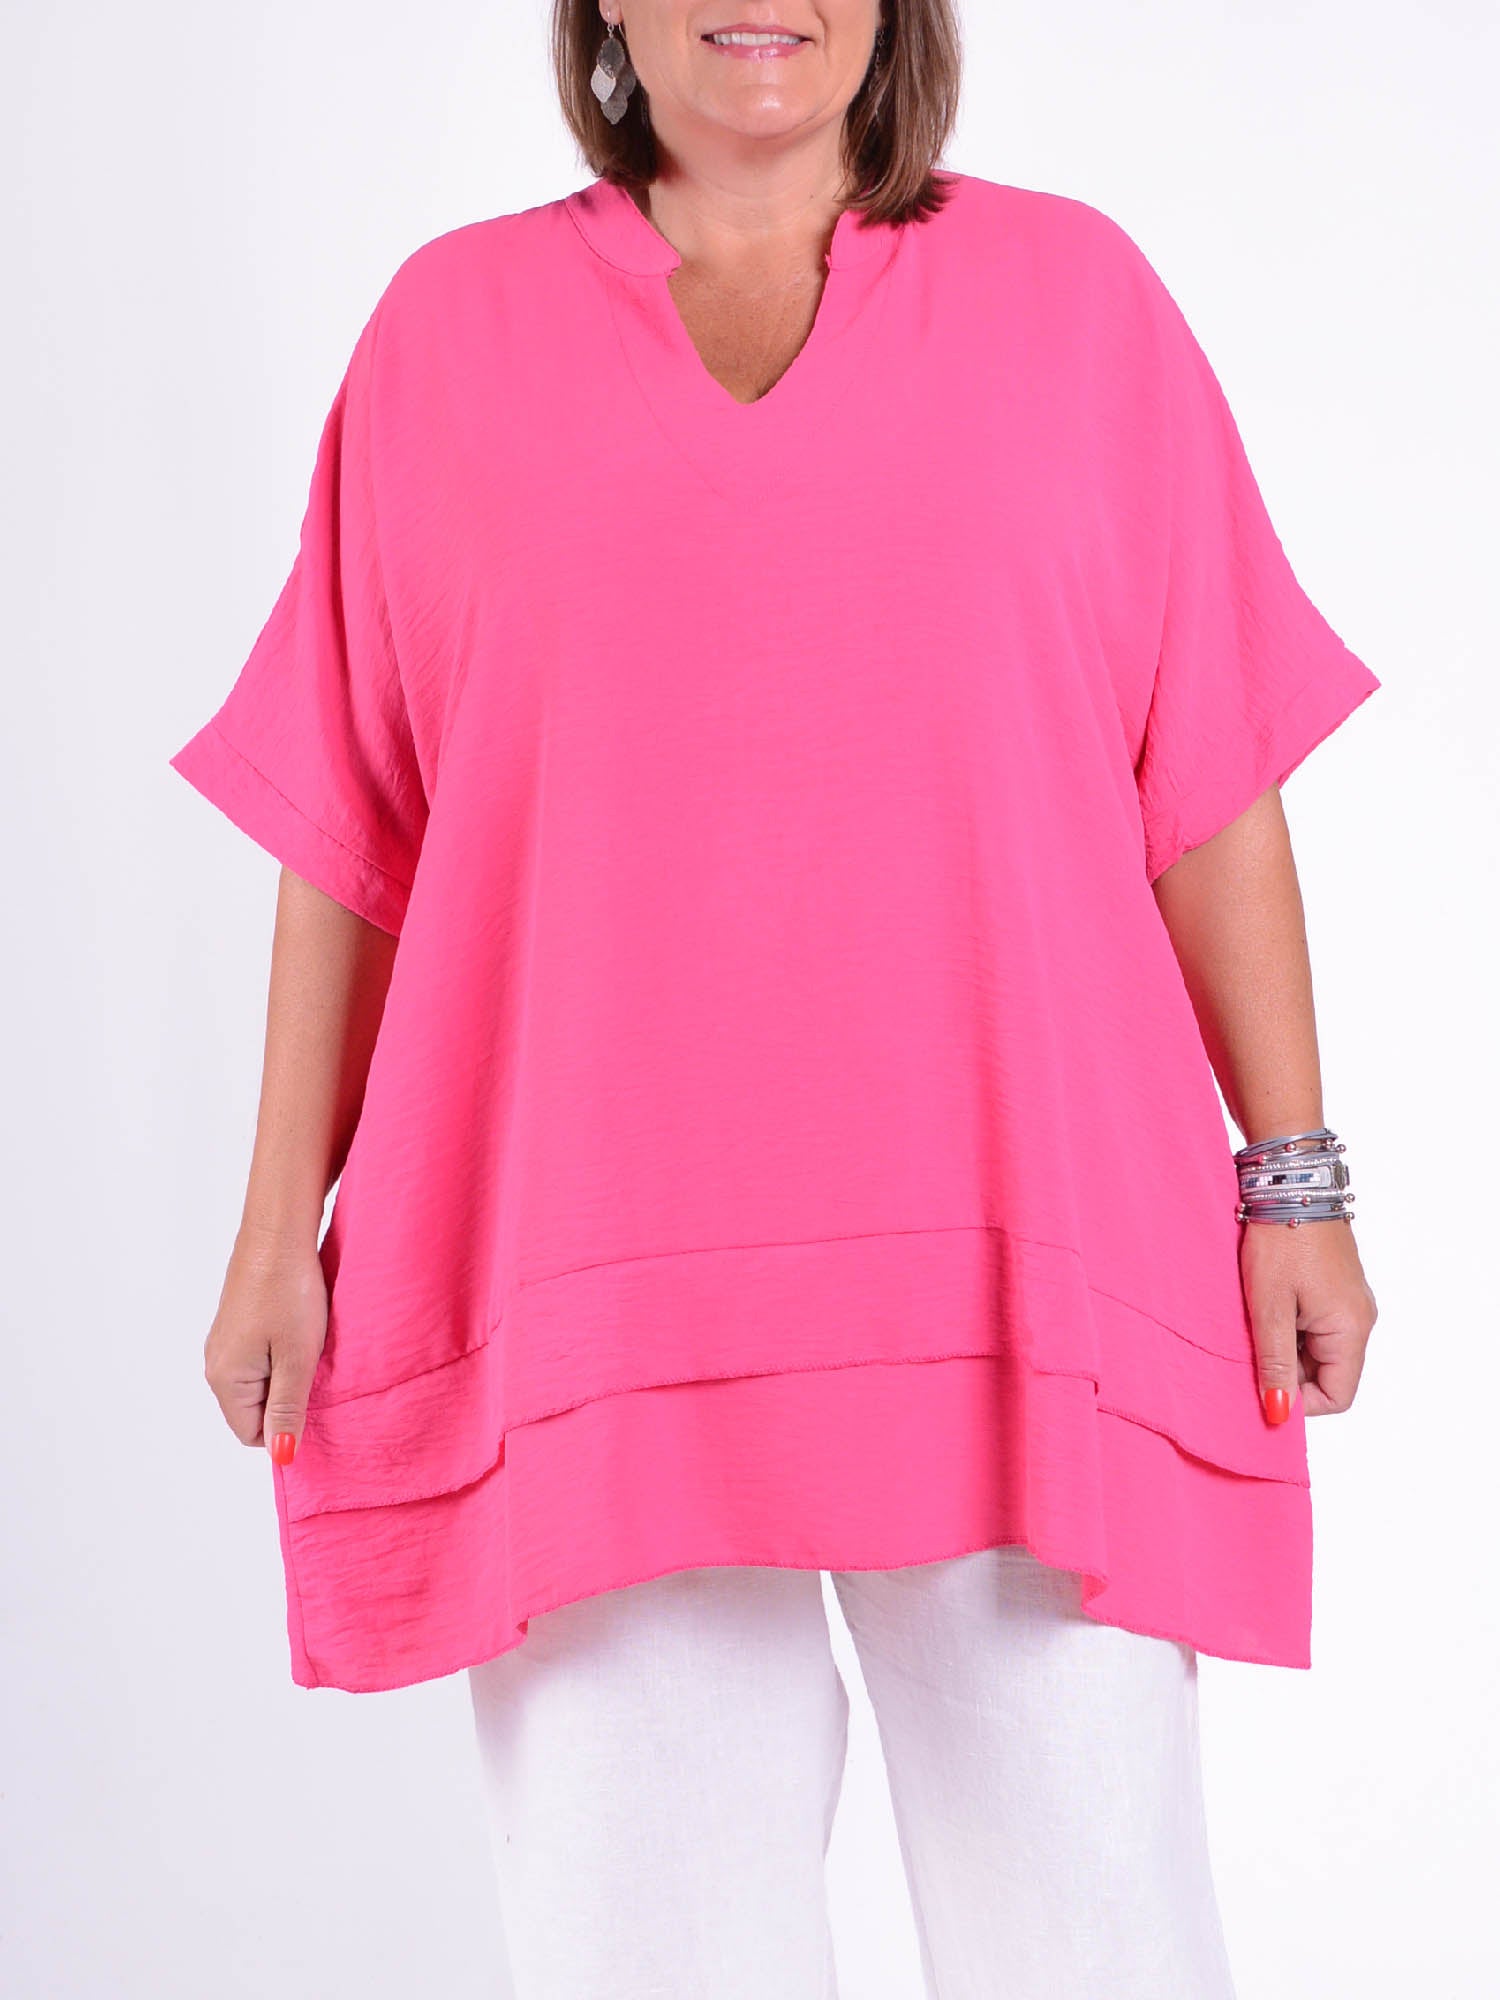 Pure Plus Oversized Lagenlook Tunic with pockets - TP1005, Tunic, Pure Plus Clothing, Lagenlook Clothing, Plus Size Fashion, Over 50 Fashion